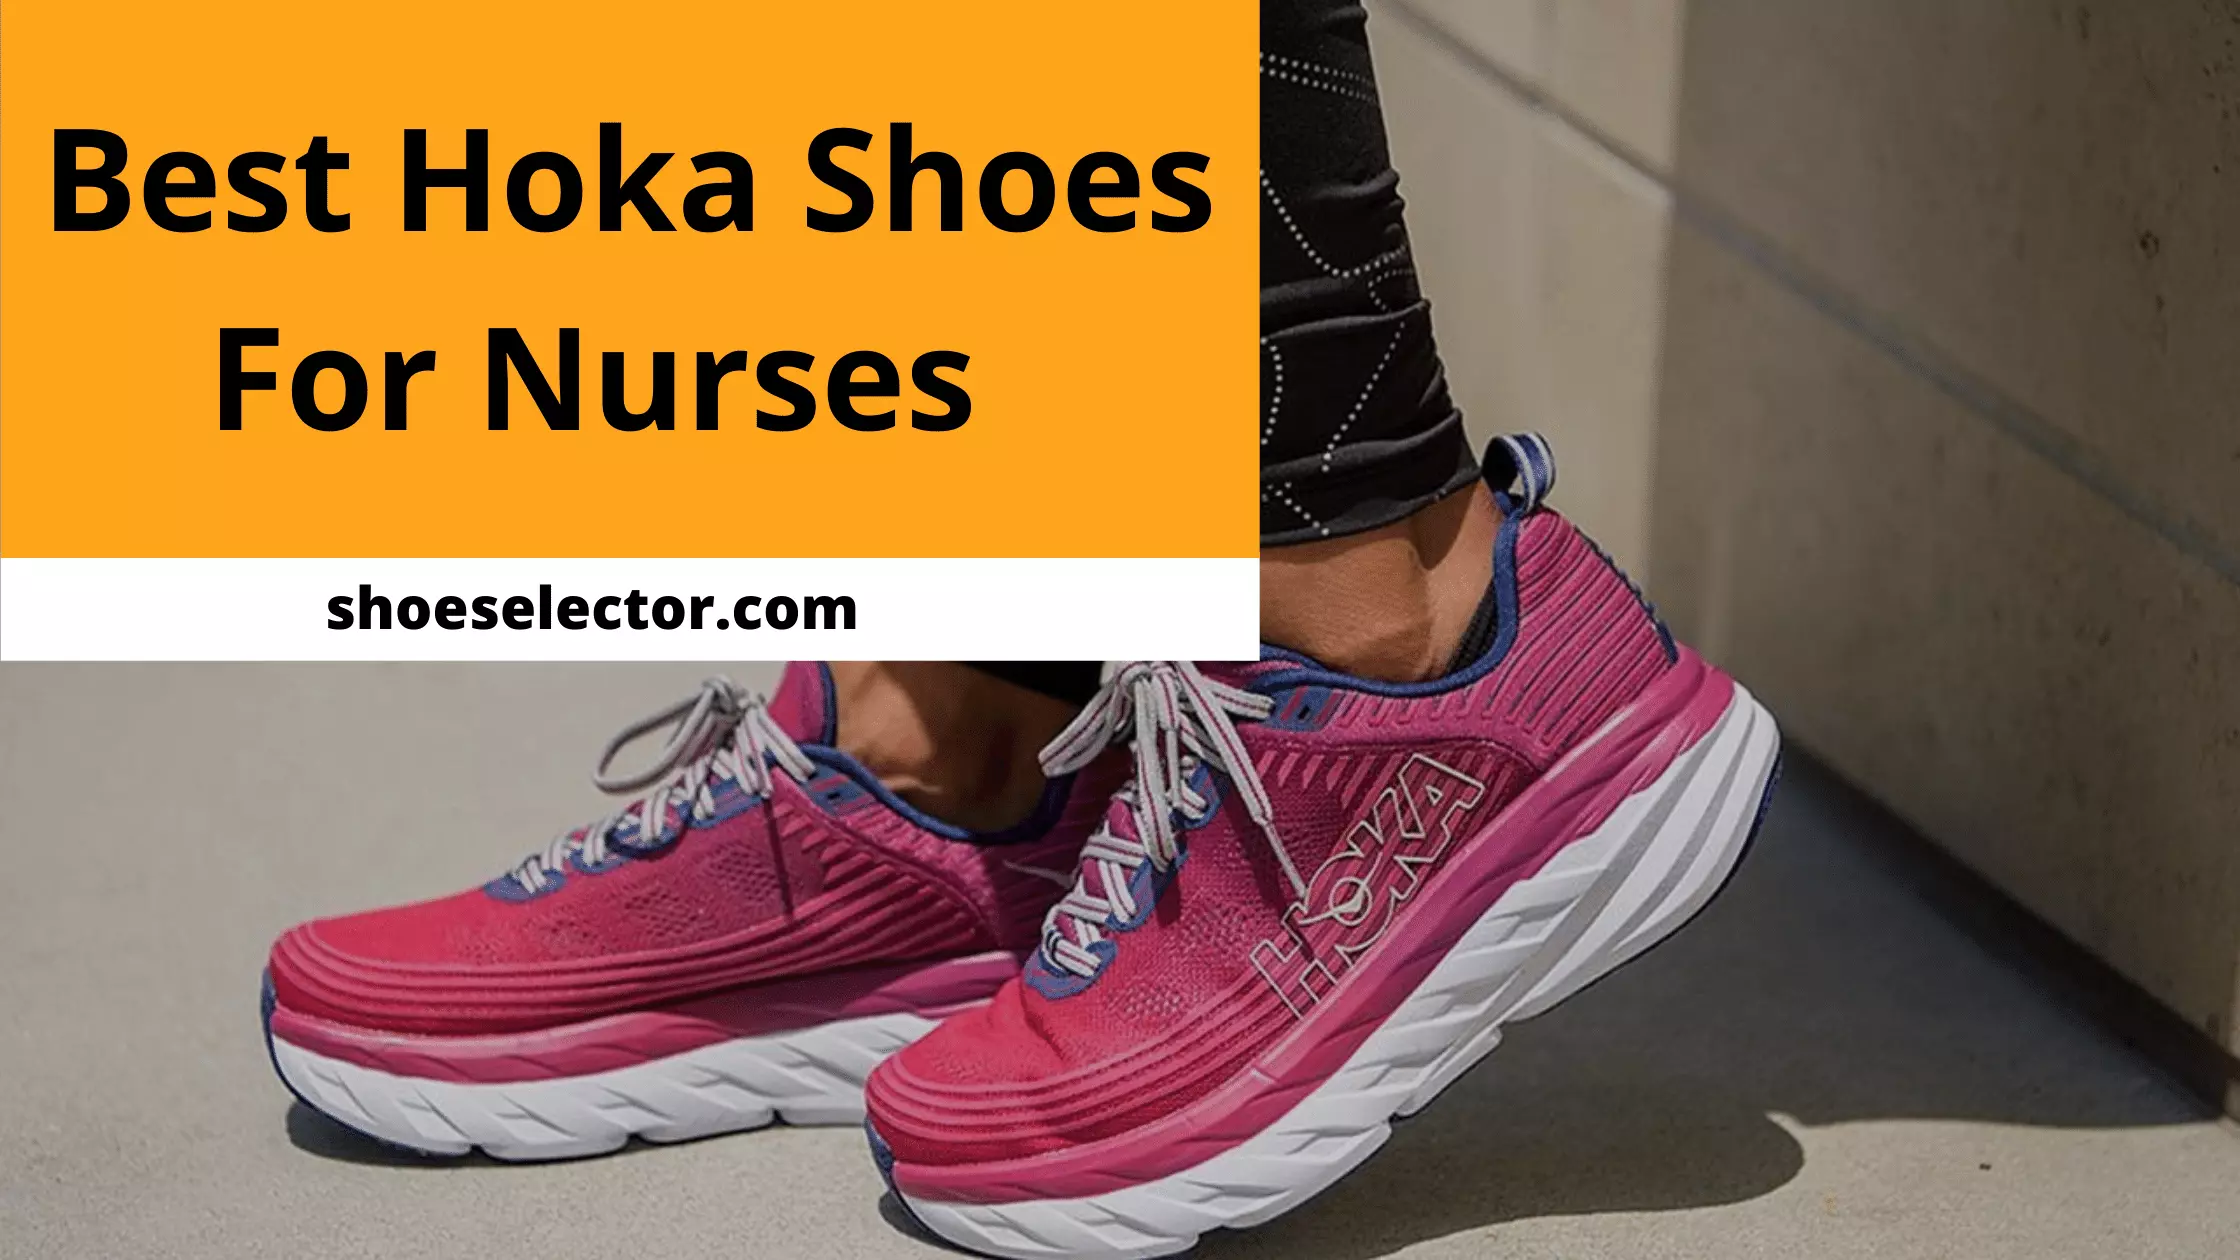 Best Hoka Shoes For Nurses - All About Comfort